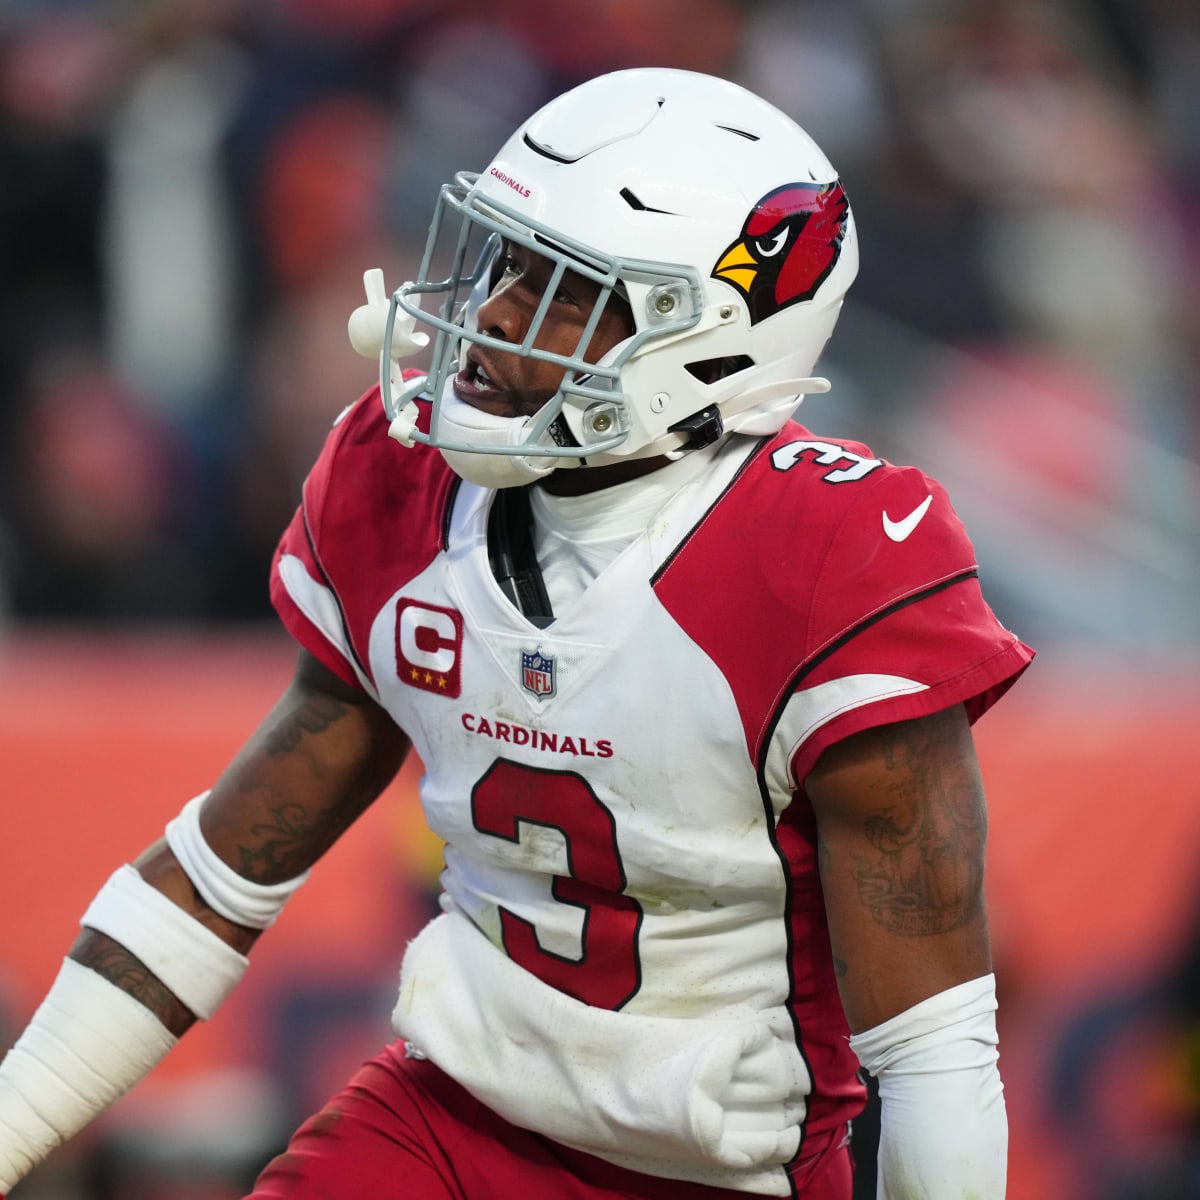 Should the Giants trade for Arizona Cardinals star safety Buddy